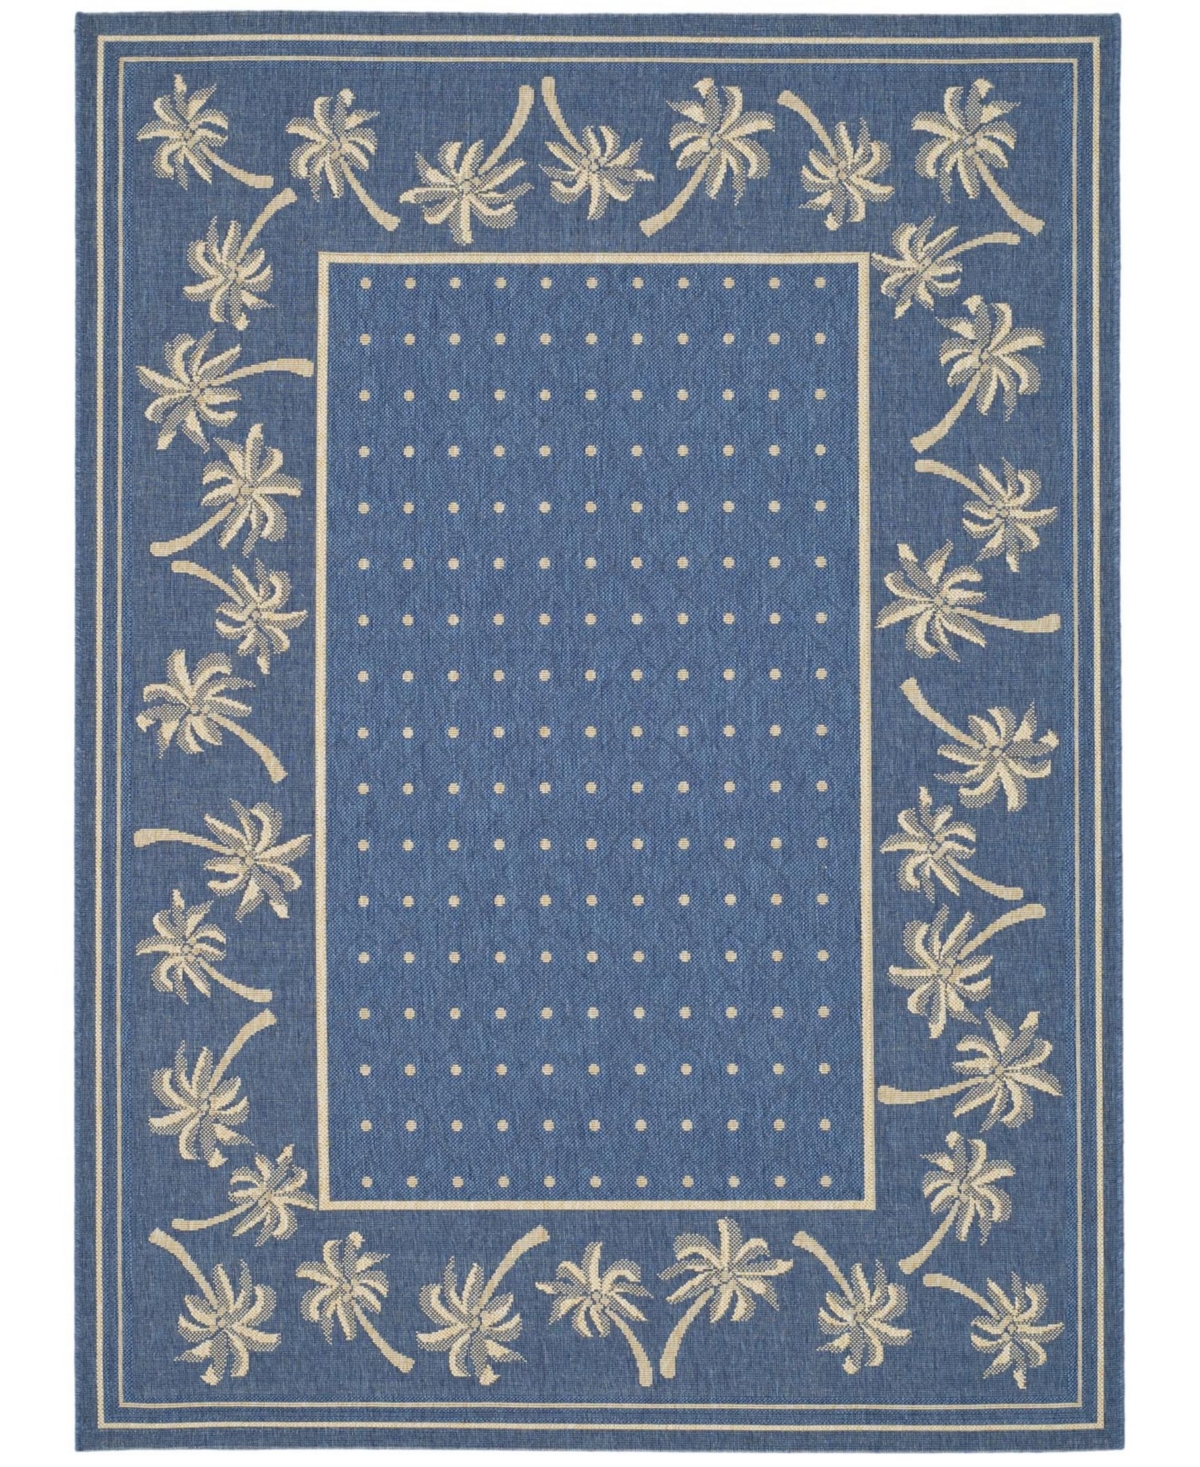 Safavieh Courtyard Cy5148 Blue And Ivory 4' X 5'7" Outdoor Area Rug